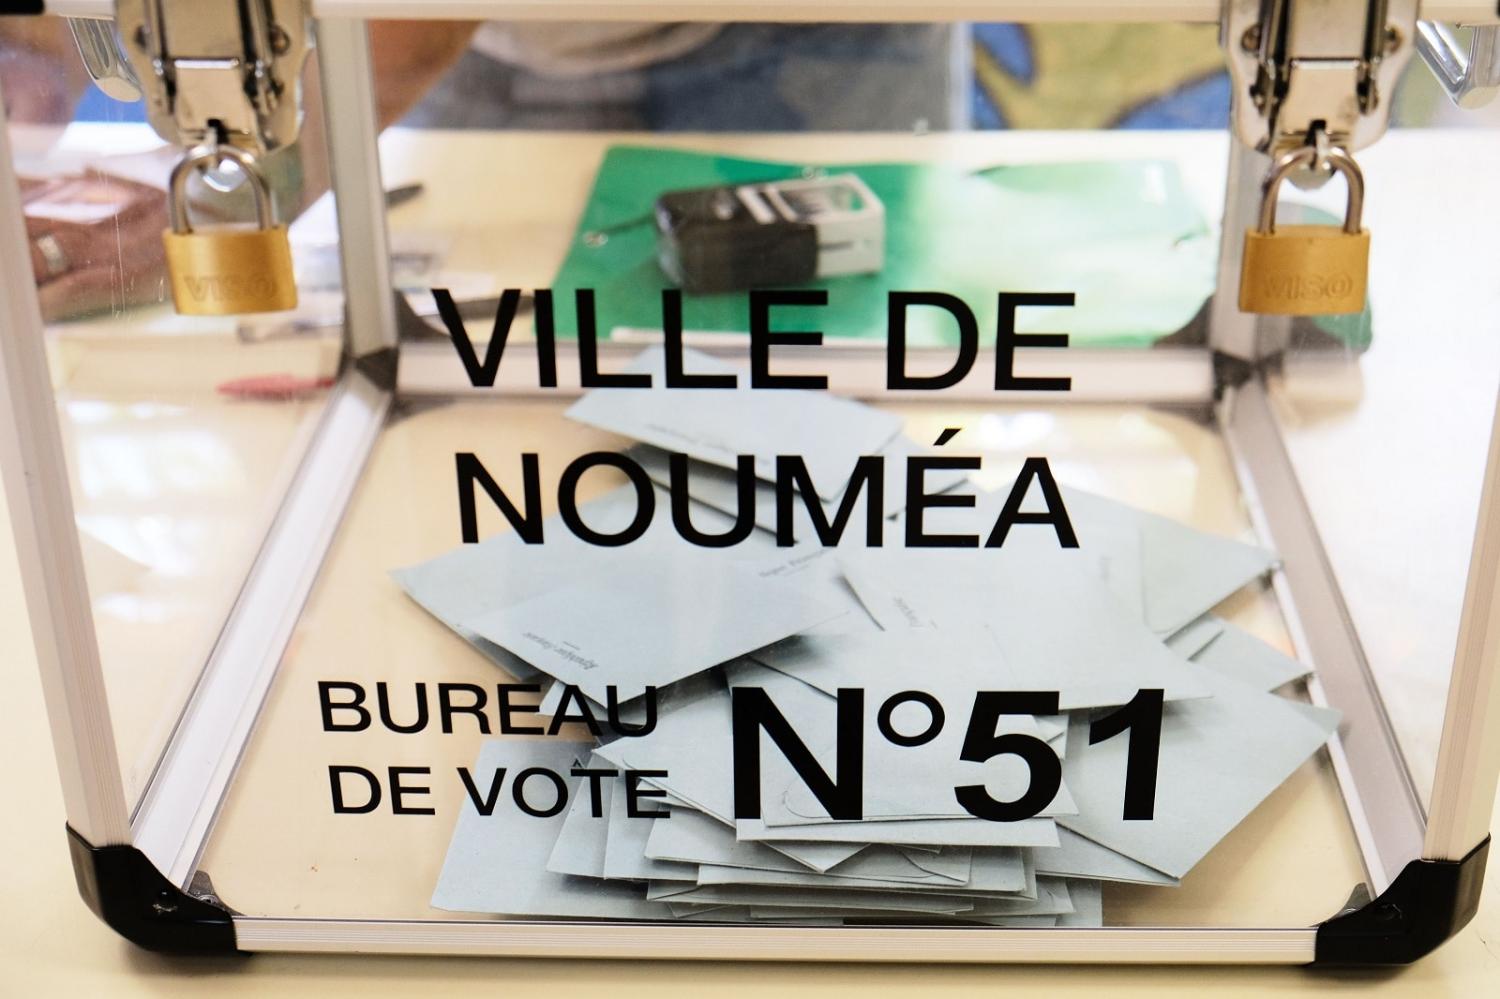 New Caledonia voted in a second independence referendum on 4 October 2020 (Theo Rouby/AFP via Getty Images)